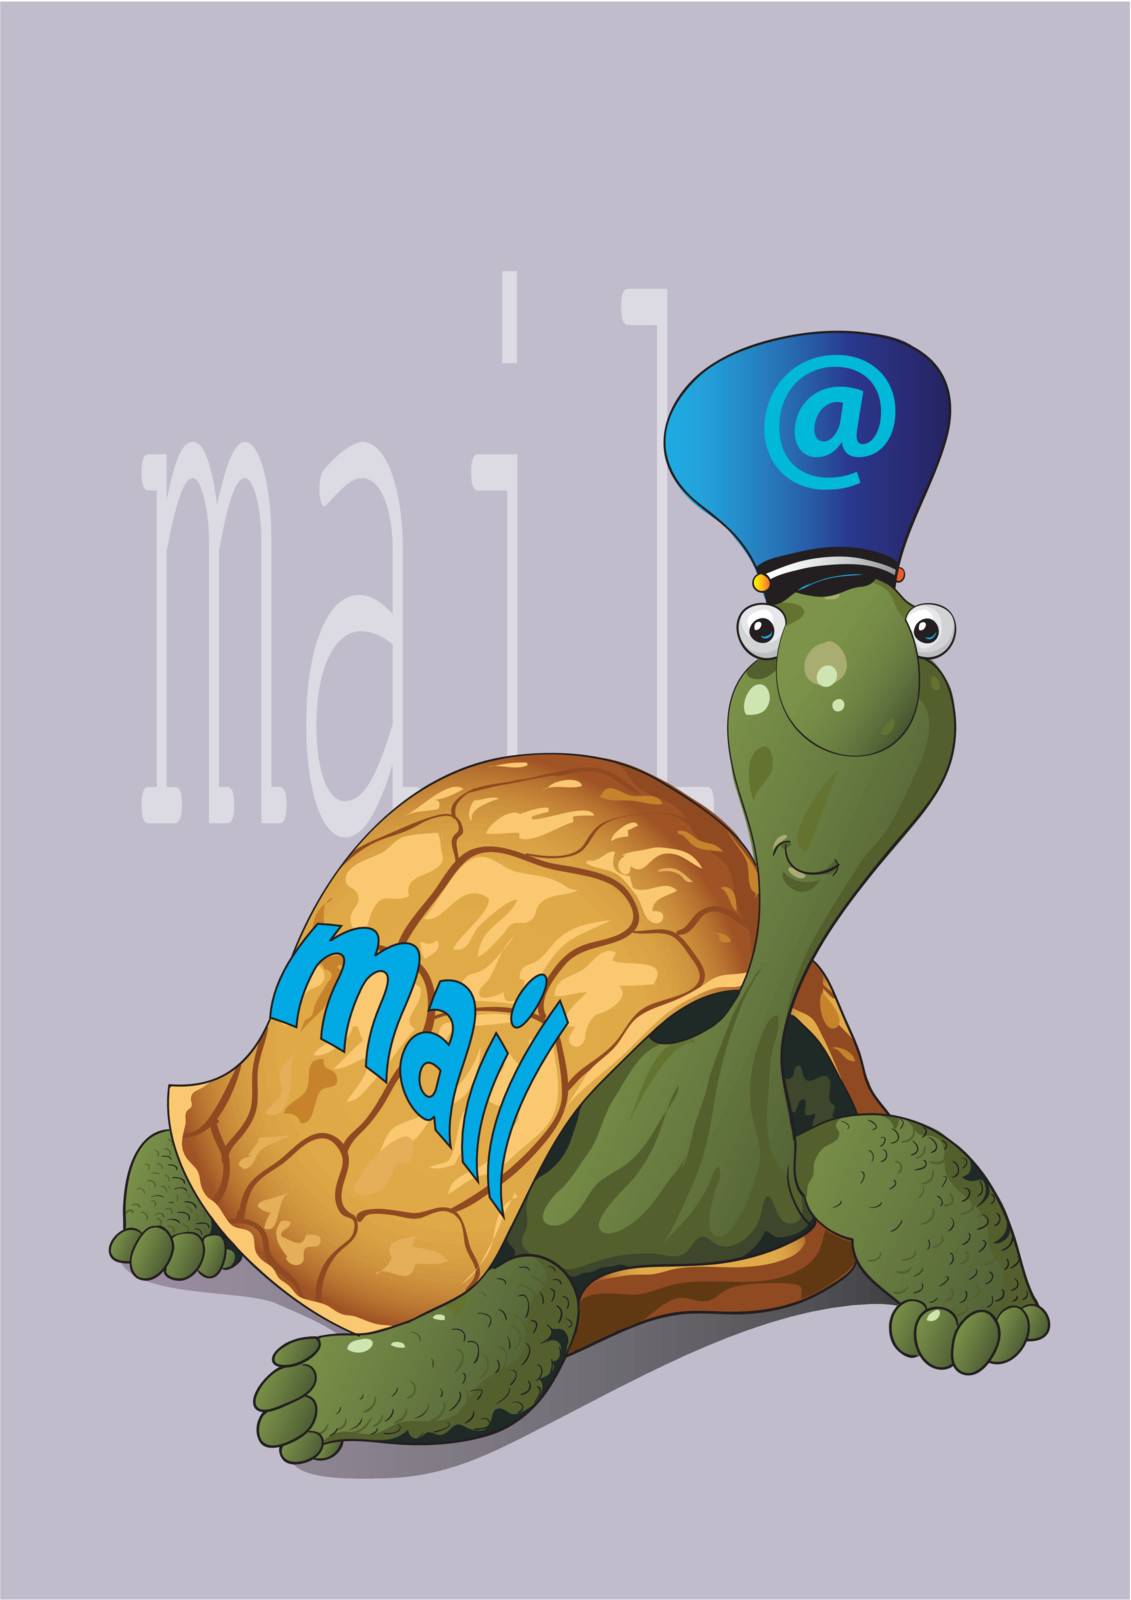 The turtle which liked to carry mail.